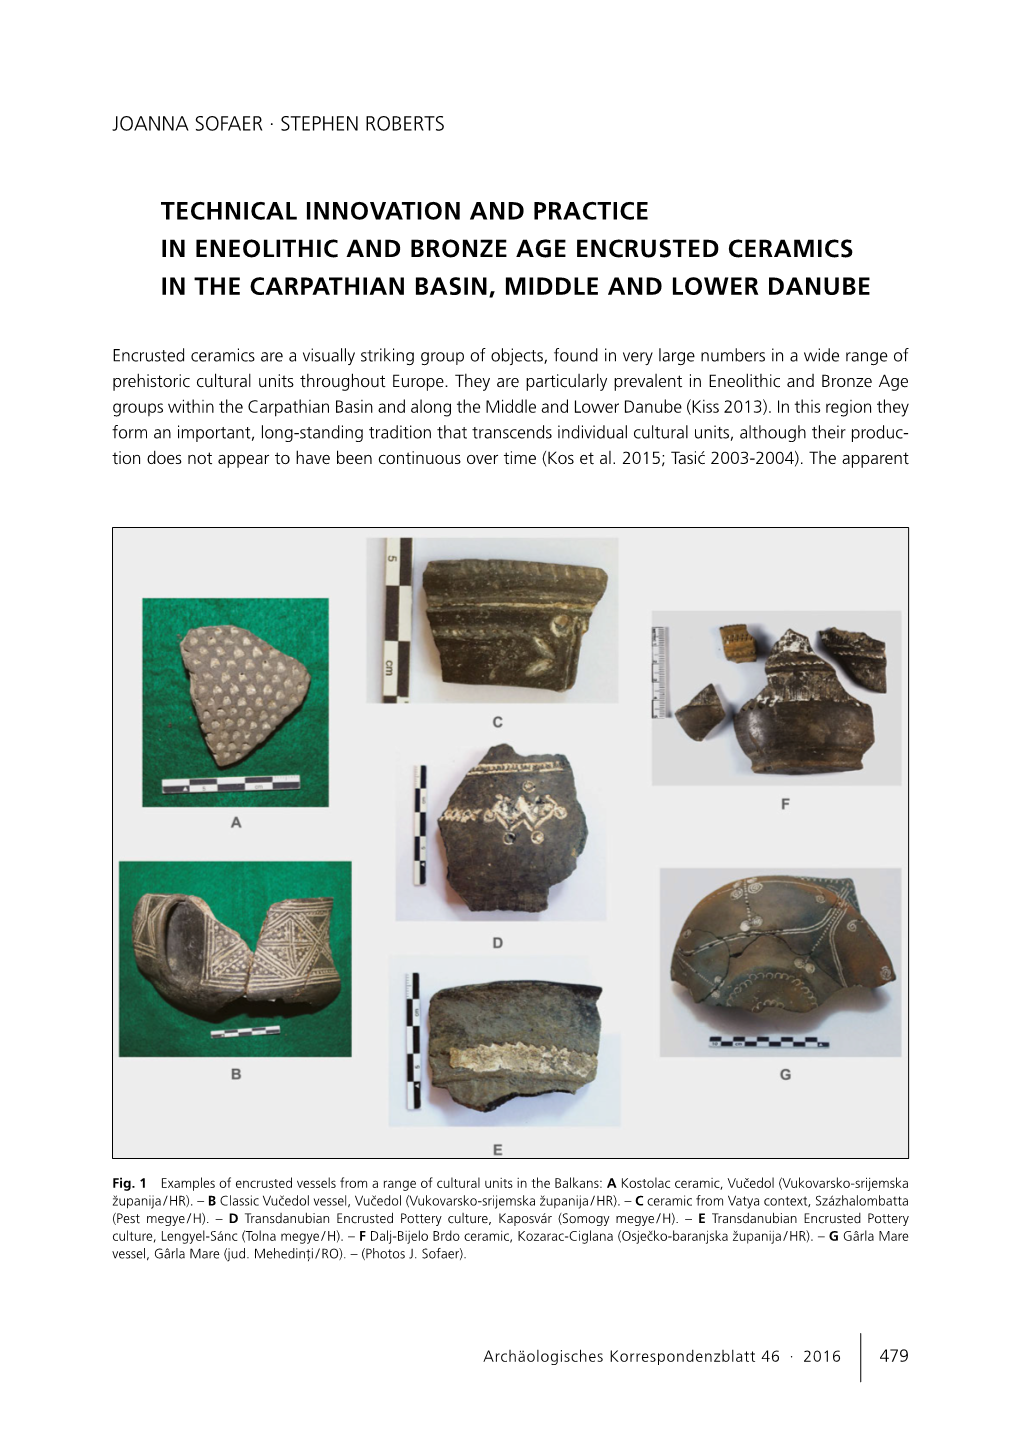 Technical Innovation and Practice in Eneolithic and Bronze Age Encrusted Ceramics in the Carpathian Basin, Middle and Lower Danube